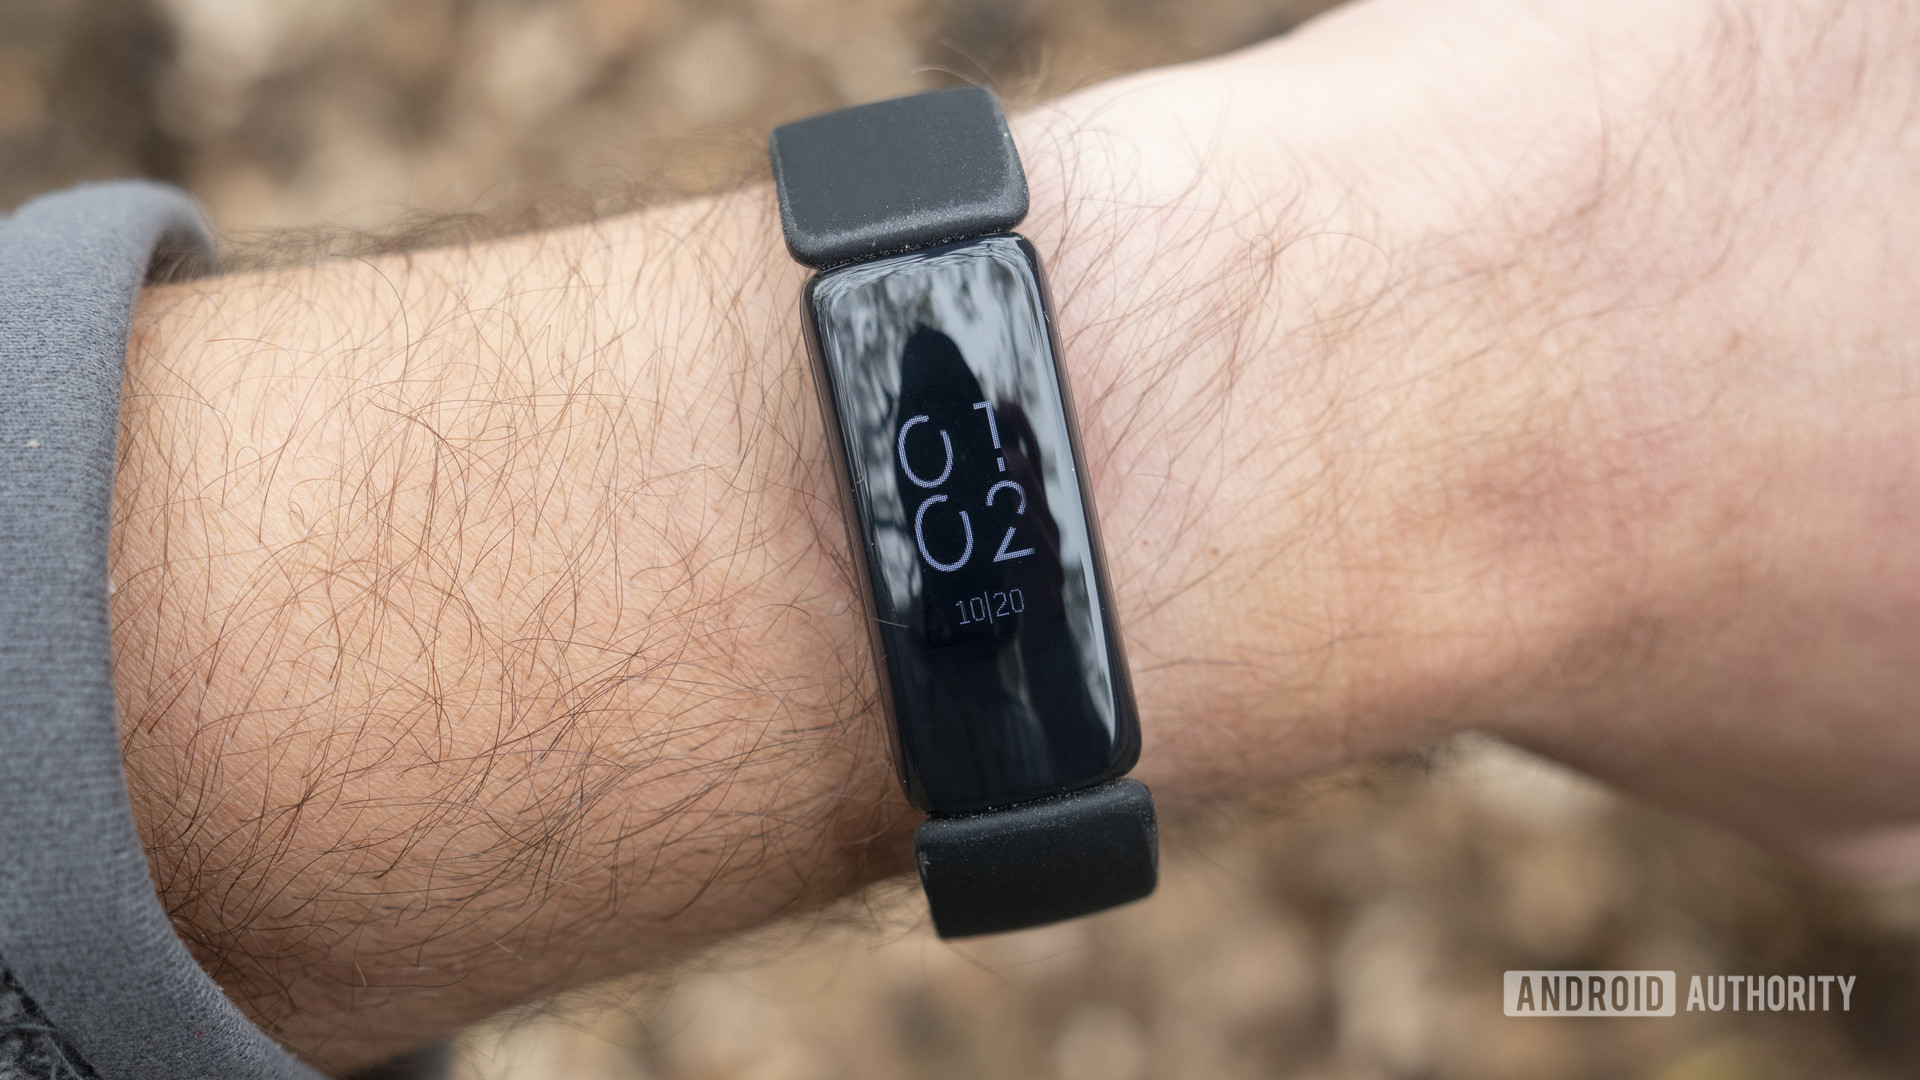 Fitbit Inspire 2 review: The little fitness tracker that gets me